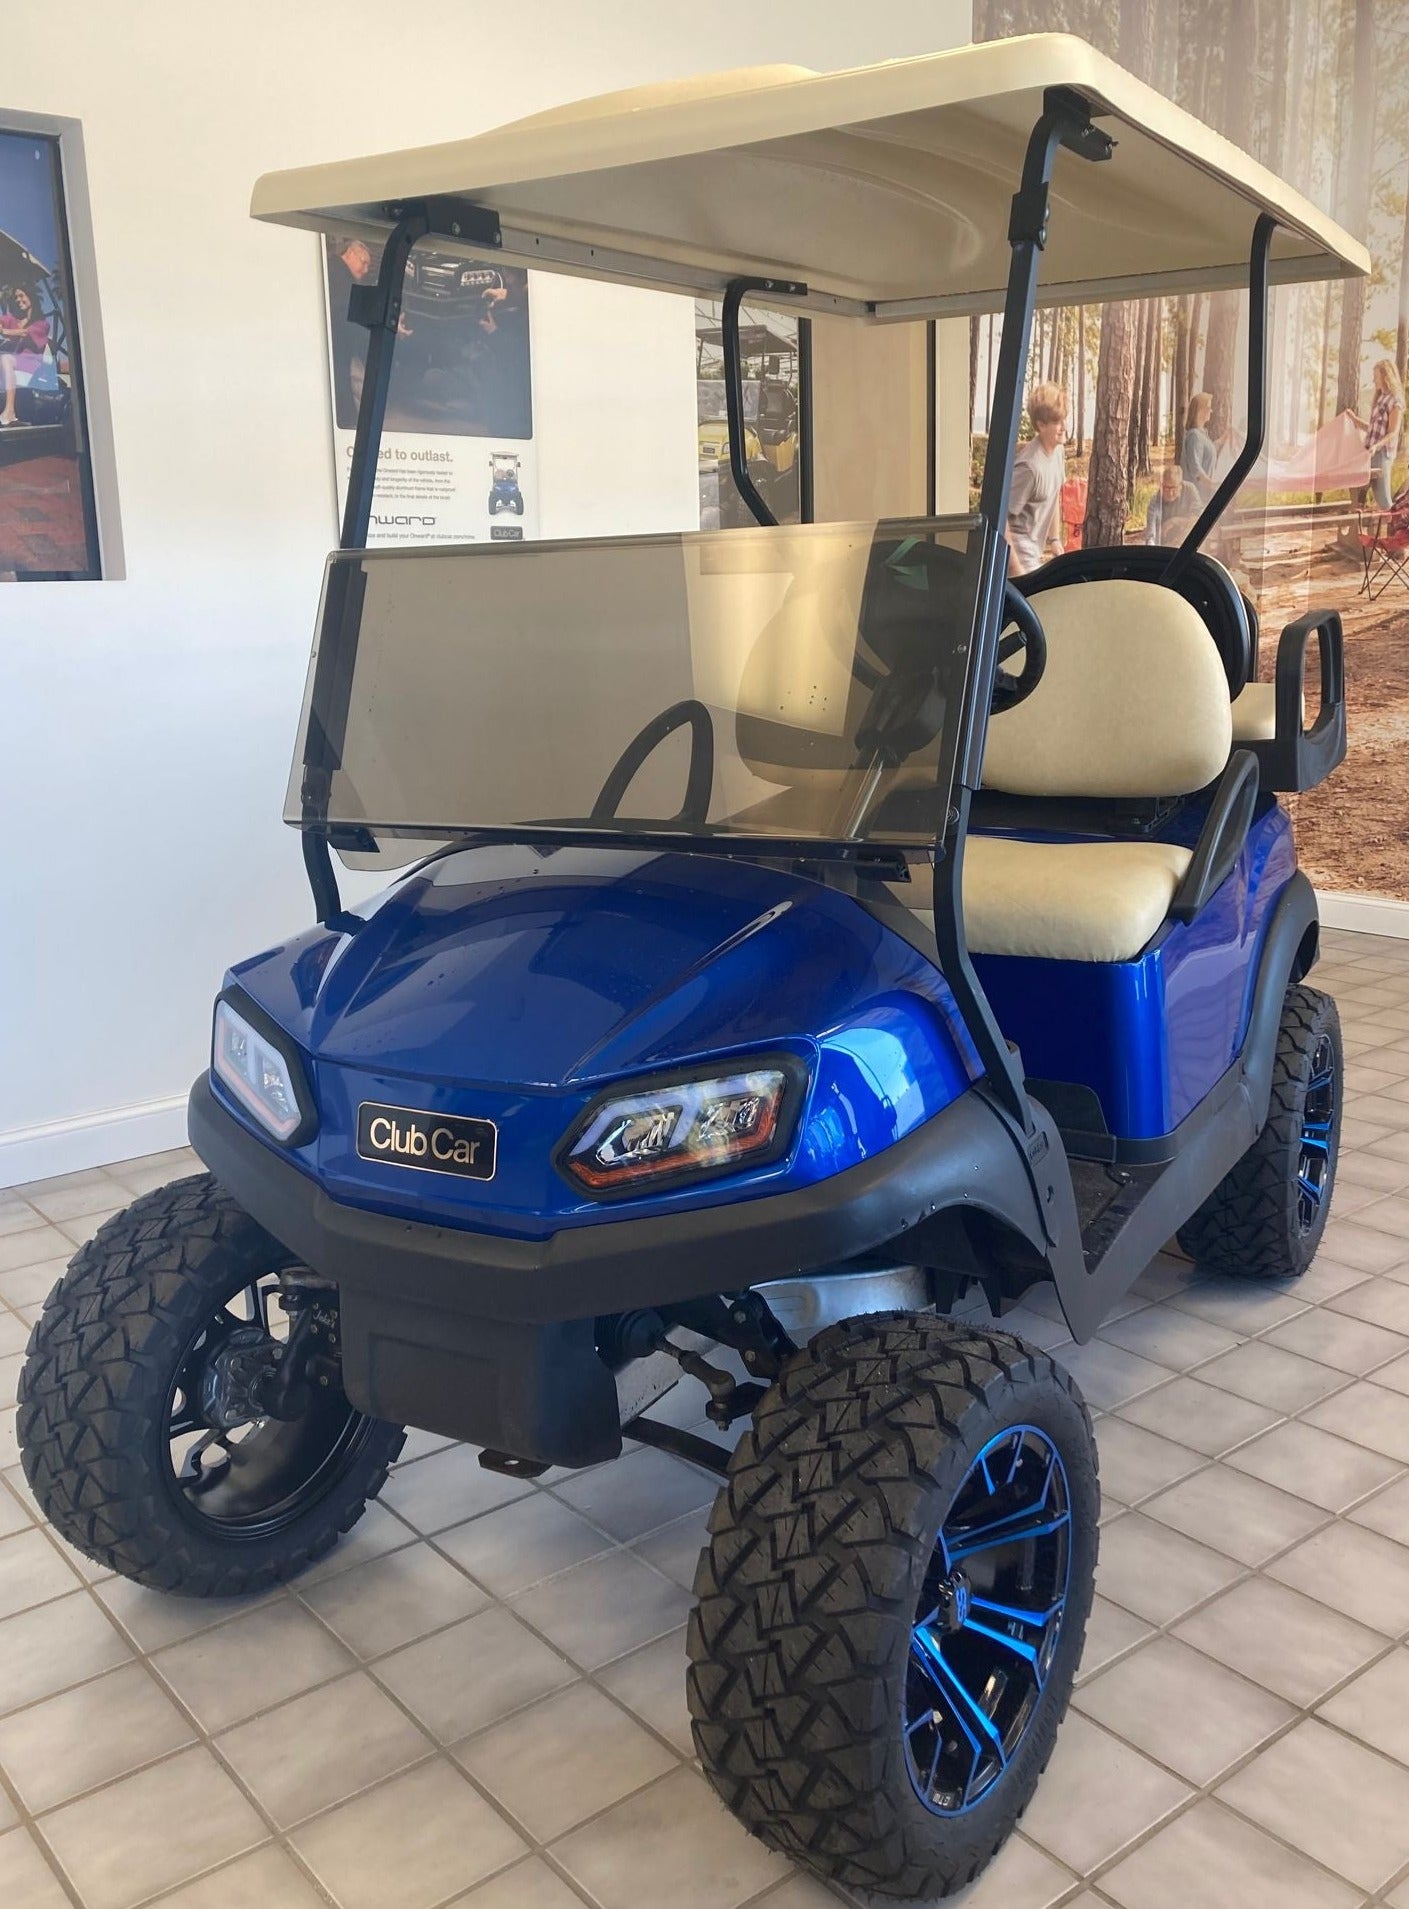 2018 ELE TEMPO PEARL BLUE LIFTED 4PASS LIGHTS 2022 BATTERIES